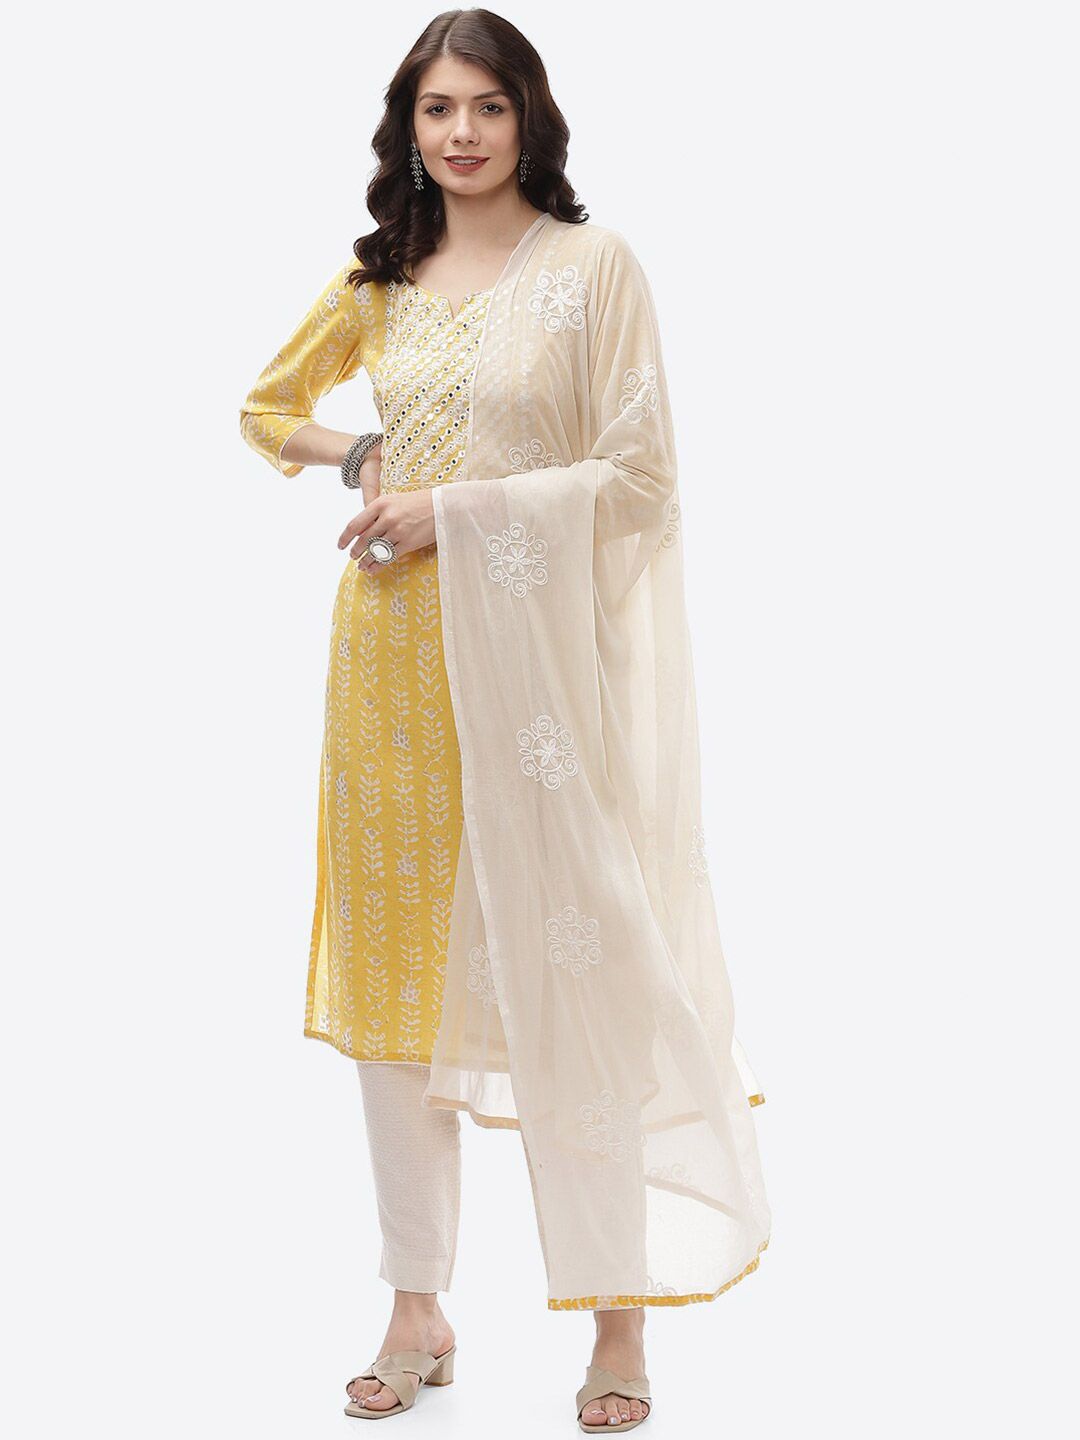 Biba Yellow & White Unstitched Dress Material Price in India